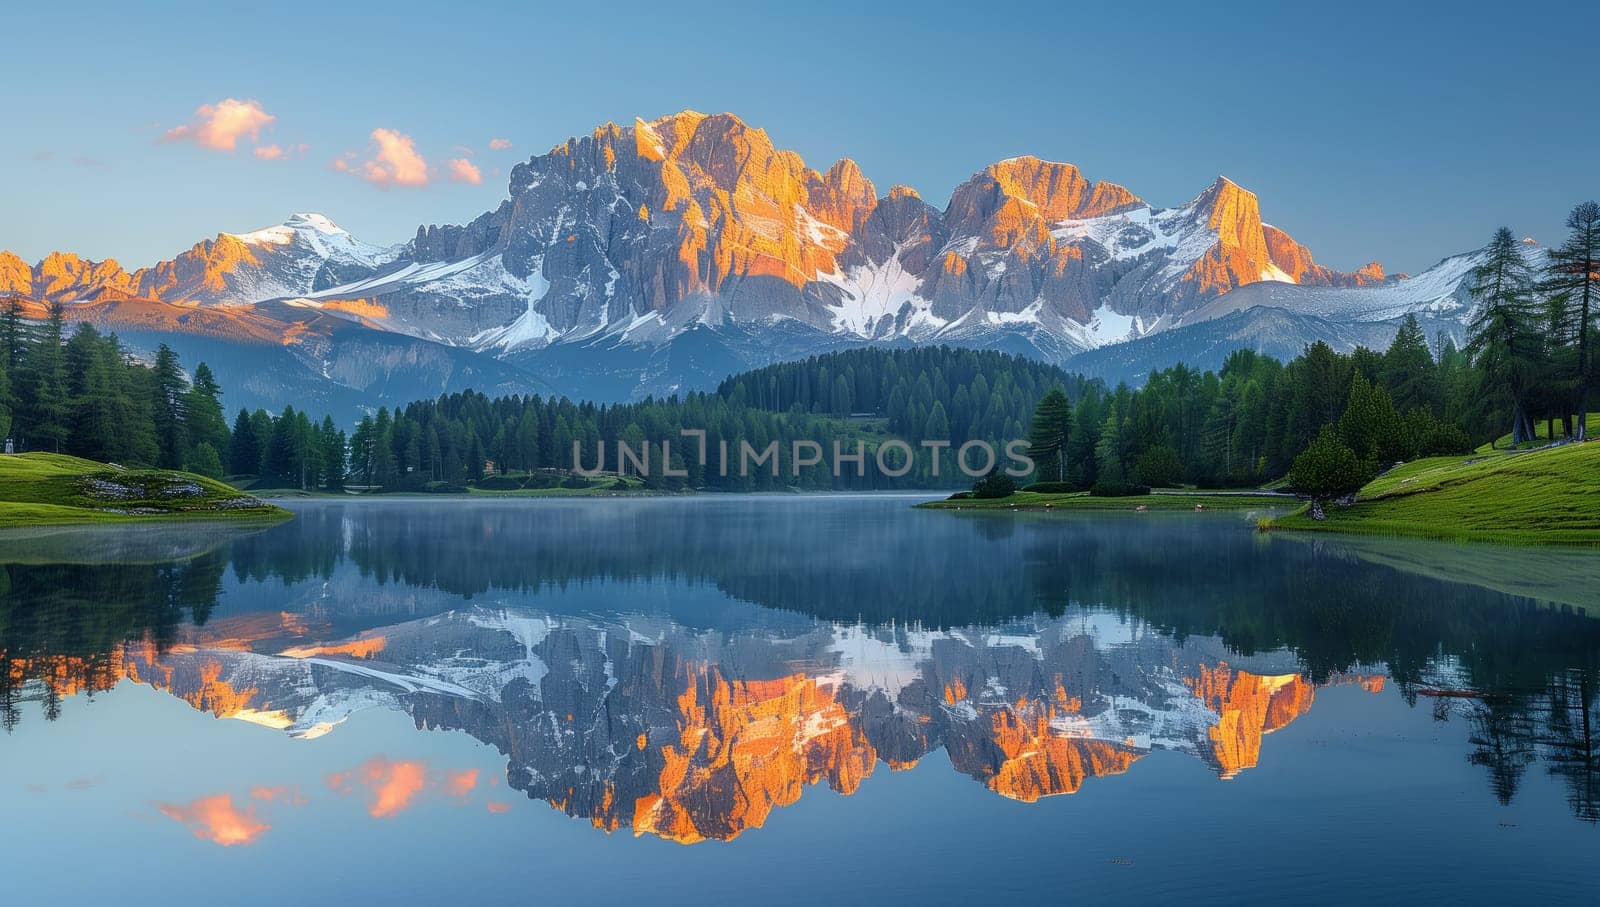 A picturesque natural landscape where a mountain is mirrored in a tranquil lake, framed by trees in the foreground, under a cloudy sky